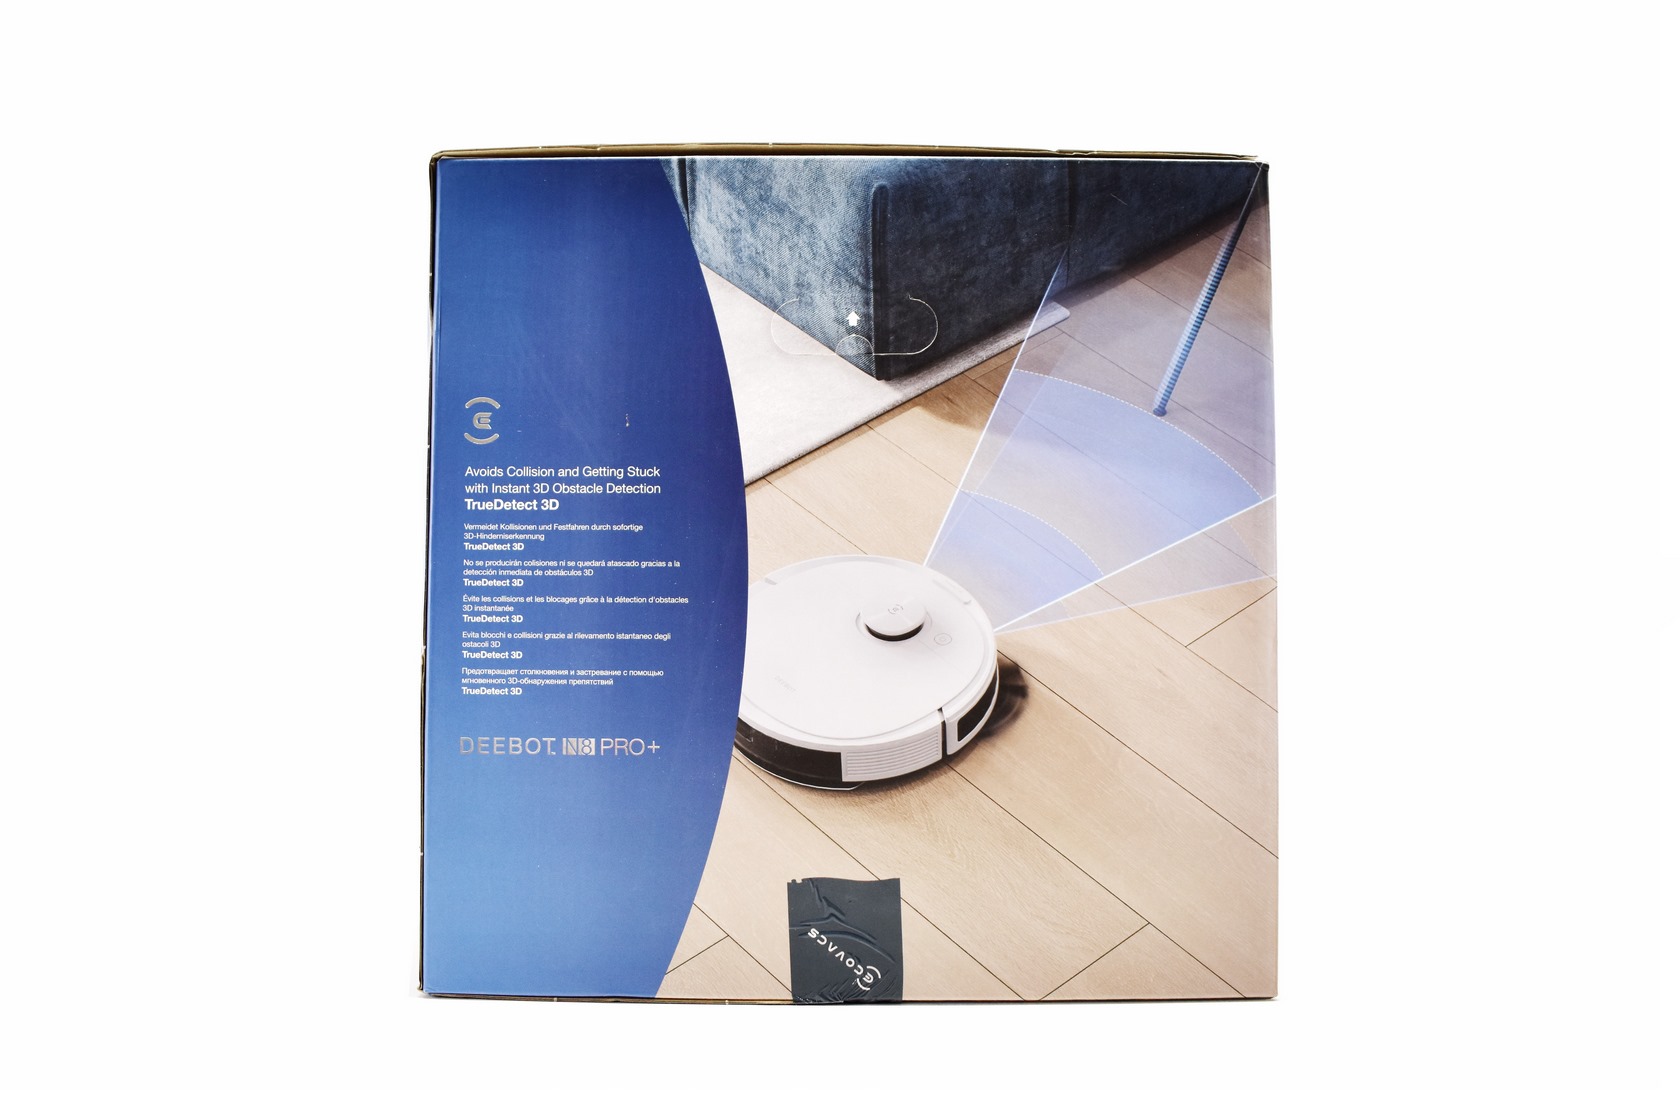 Ecovacs Deebot N8 Pro review: Amazingly strong obstacle detection